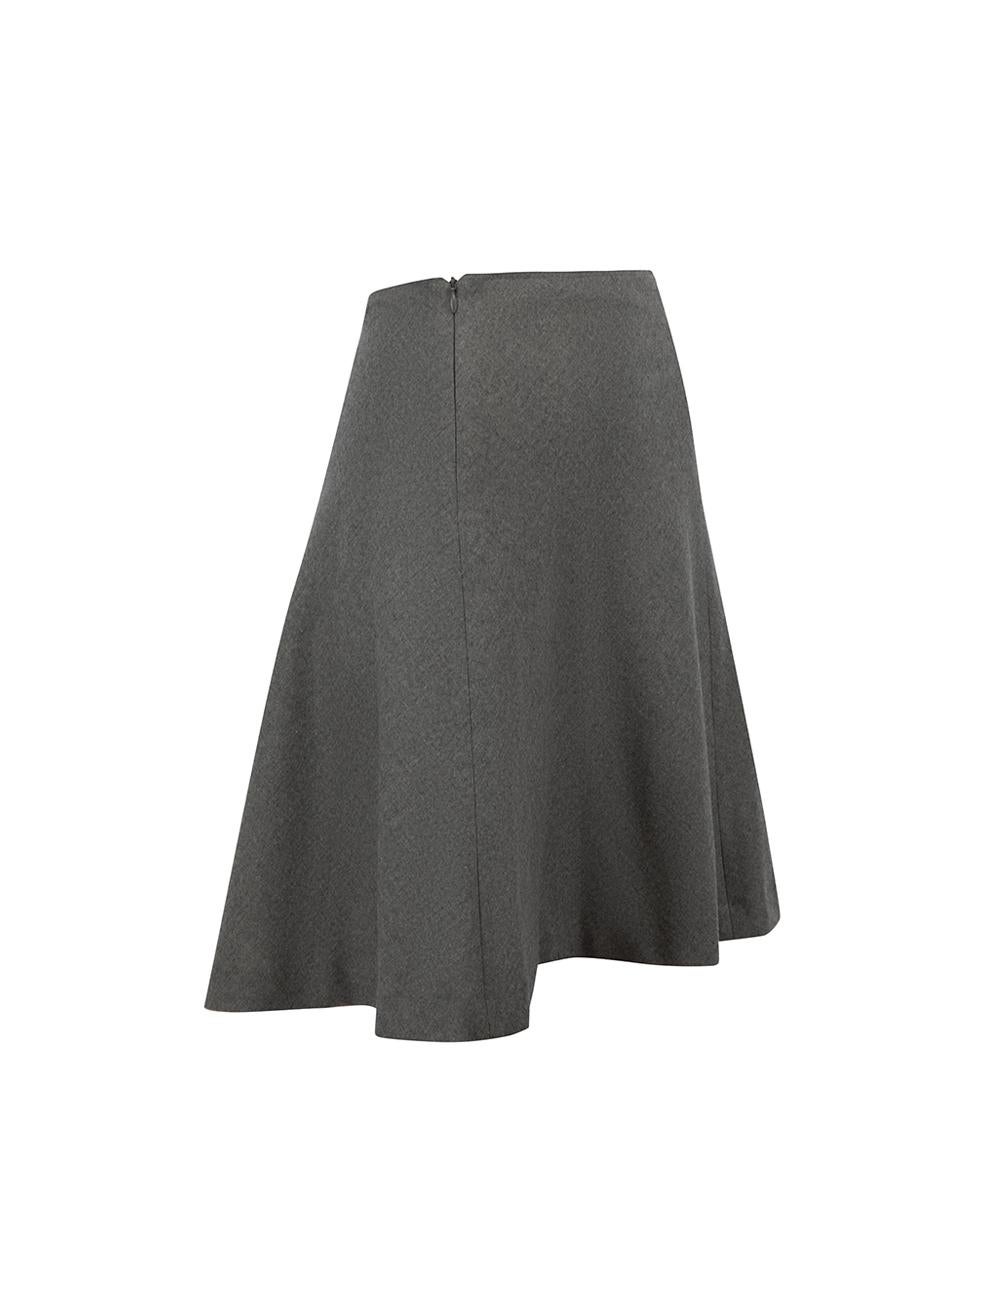 CONDITION is Very good. Hardly any visible wear to skirt is evident on this used Theory designer resale item.



Details


Grey

Silk

A-line skirt

Mini length

Side zip closure





Made in China 



Composition

100% Silk



Care instructions: